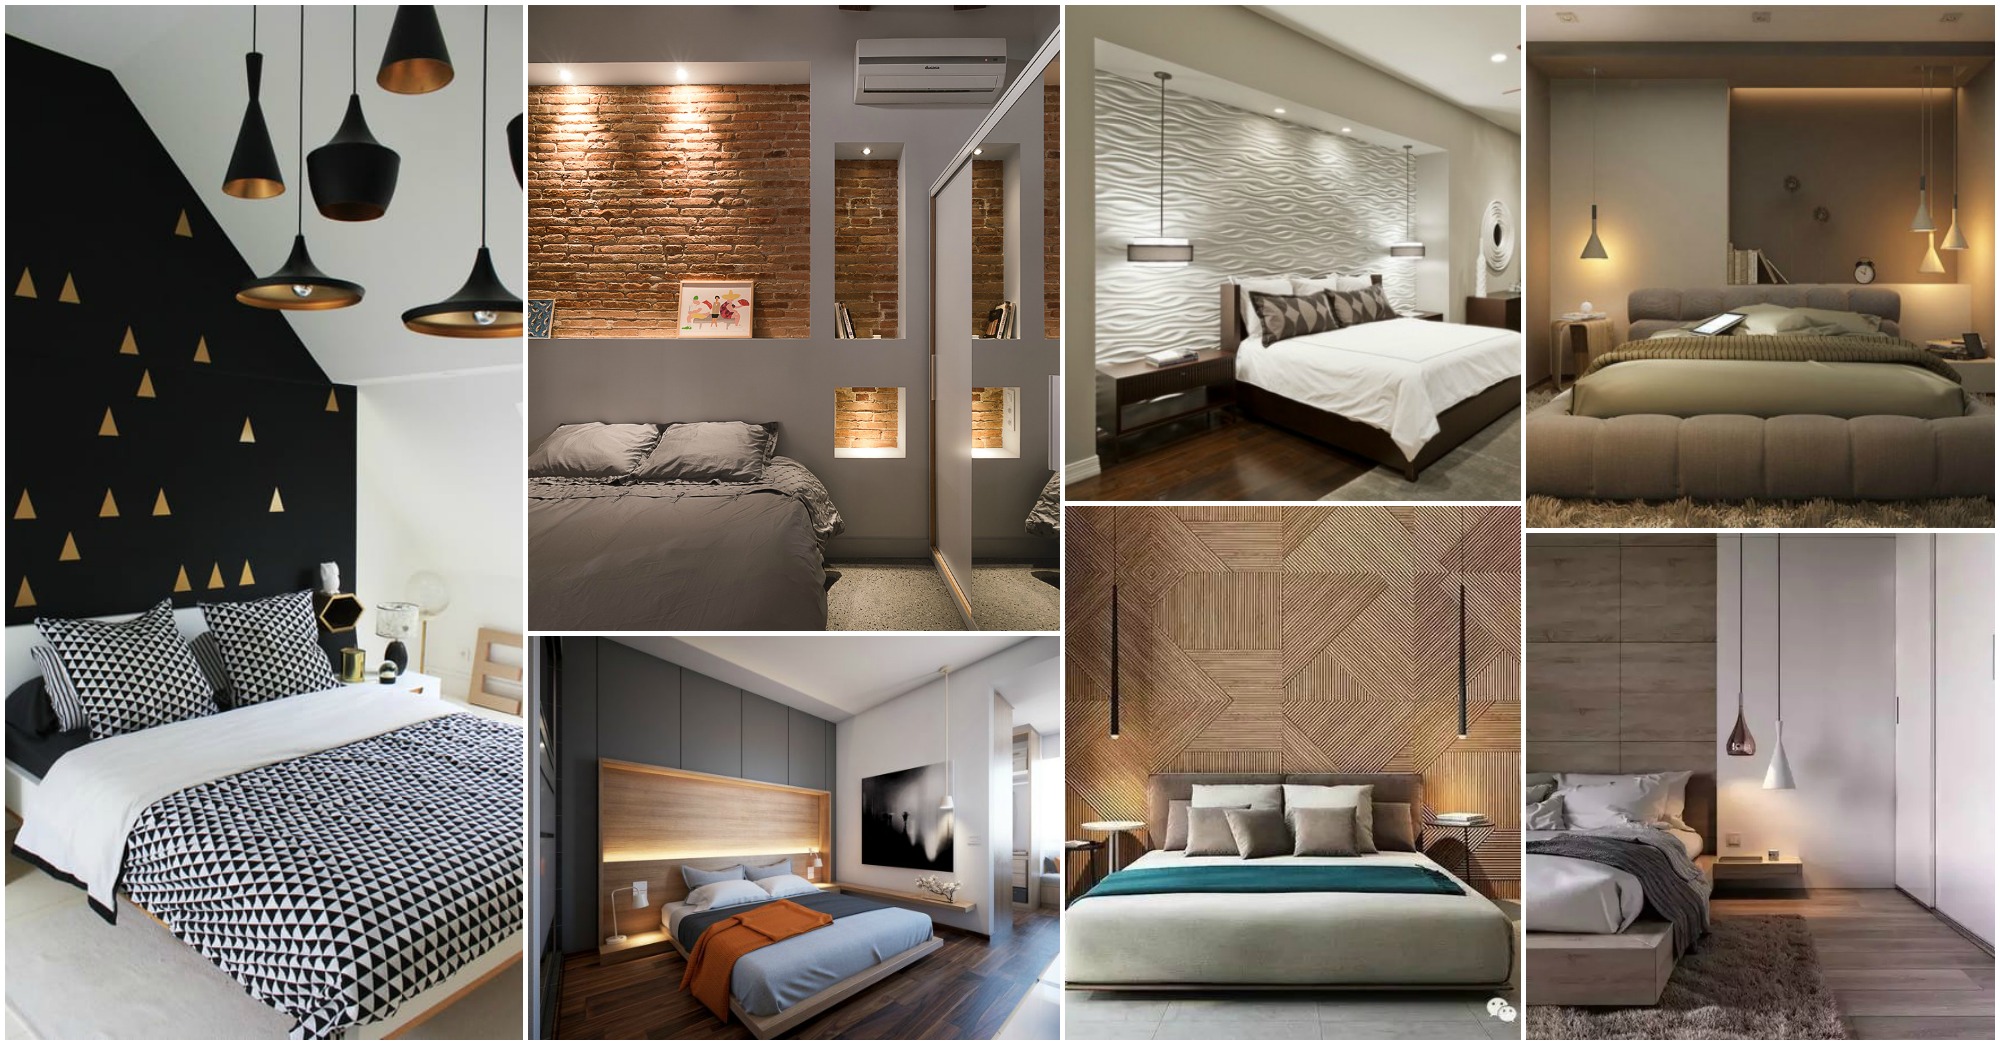 Stunning Bedroom Lighting Ideas That Will Warm Up The Atmosphere